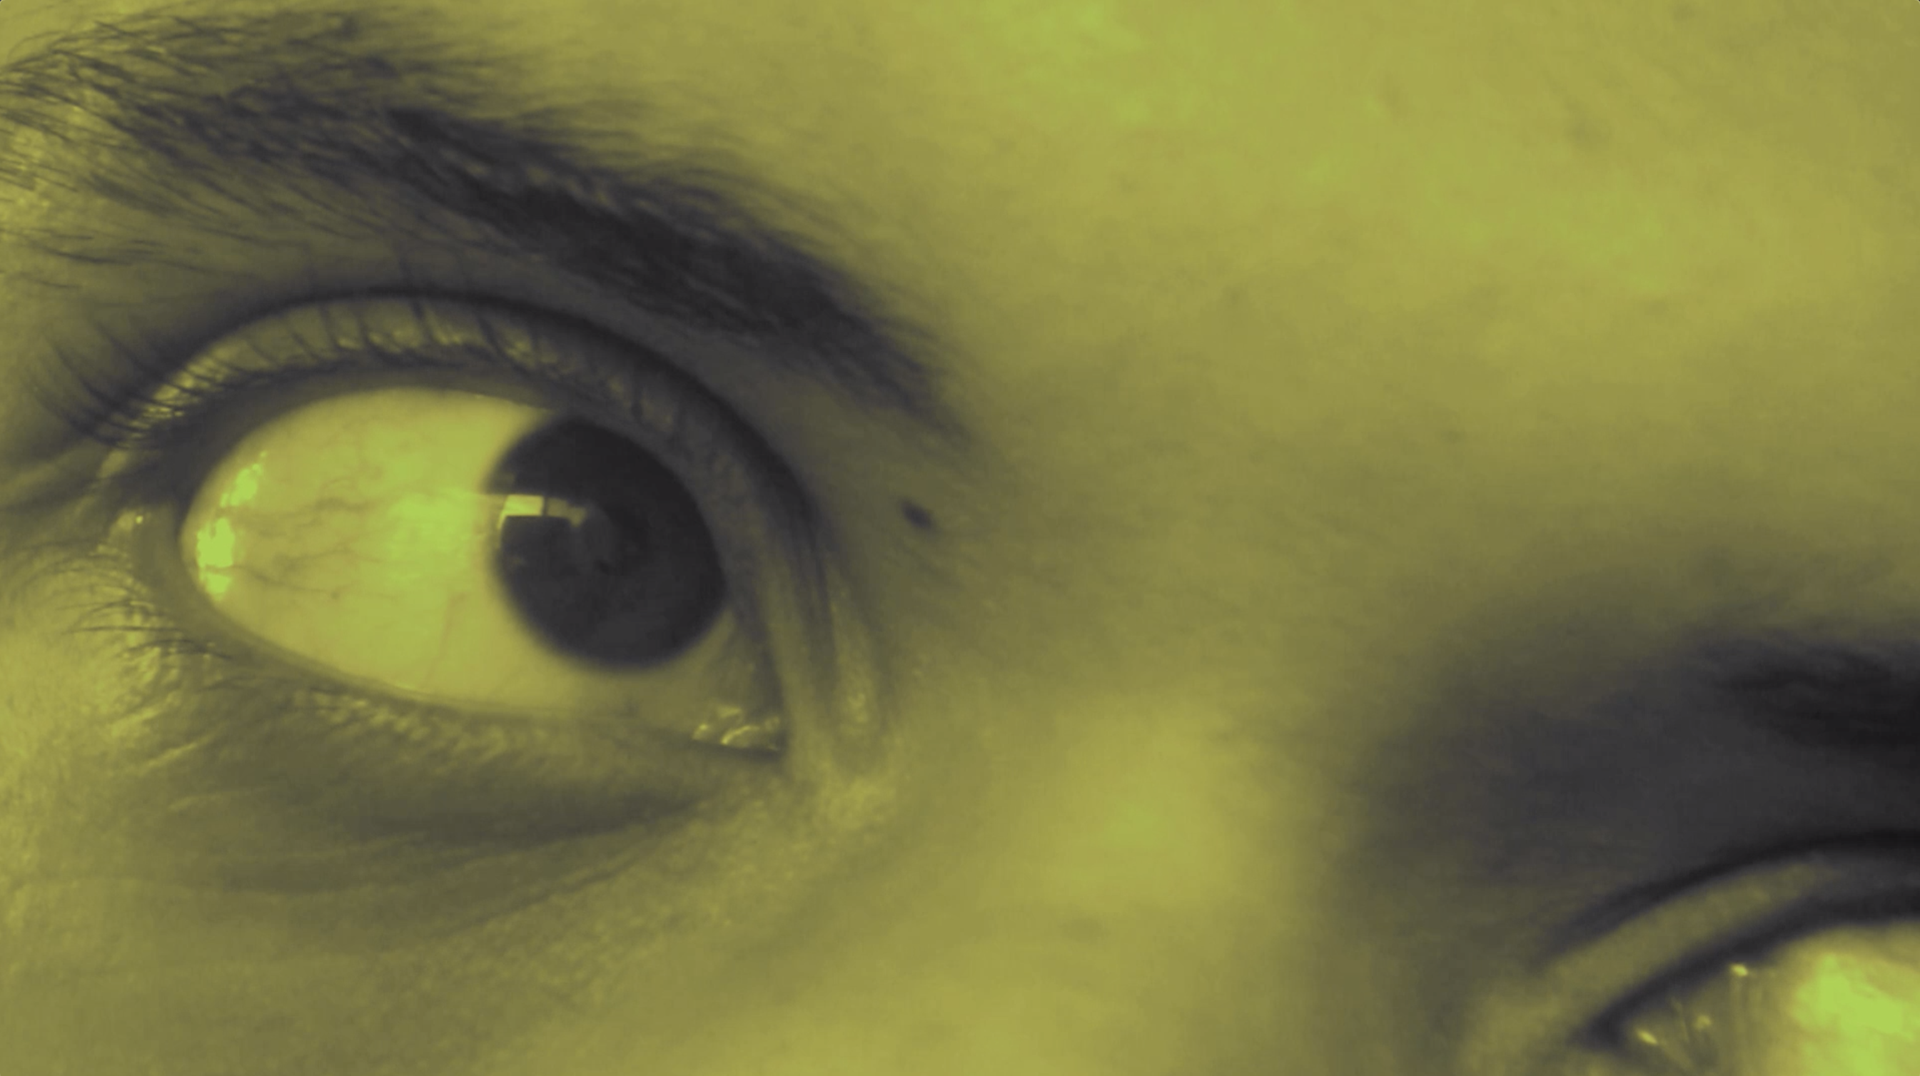 Screen capture of a digital short film which shows a green toned closeup shot of the actor's eyes